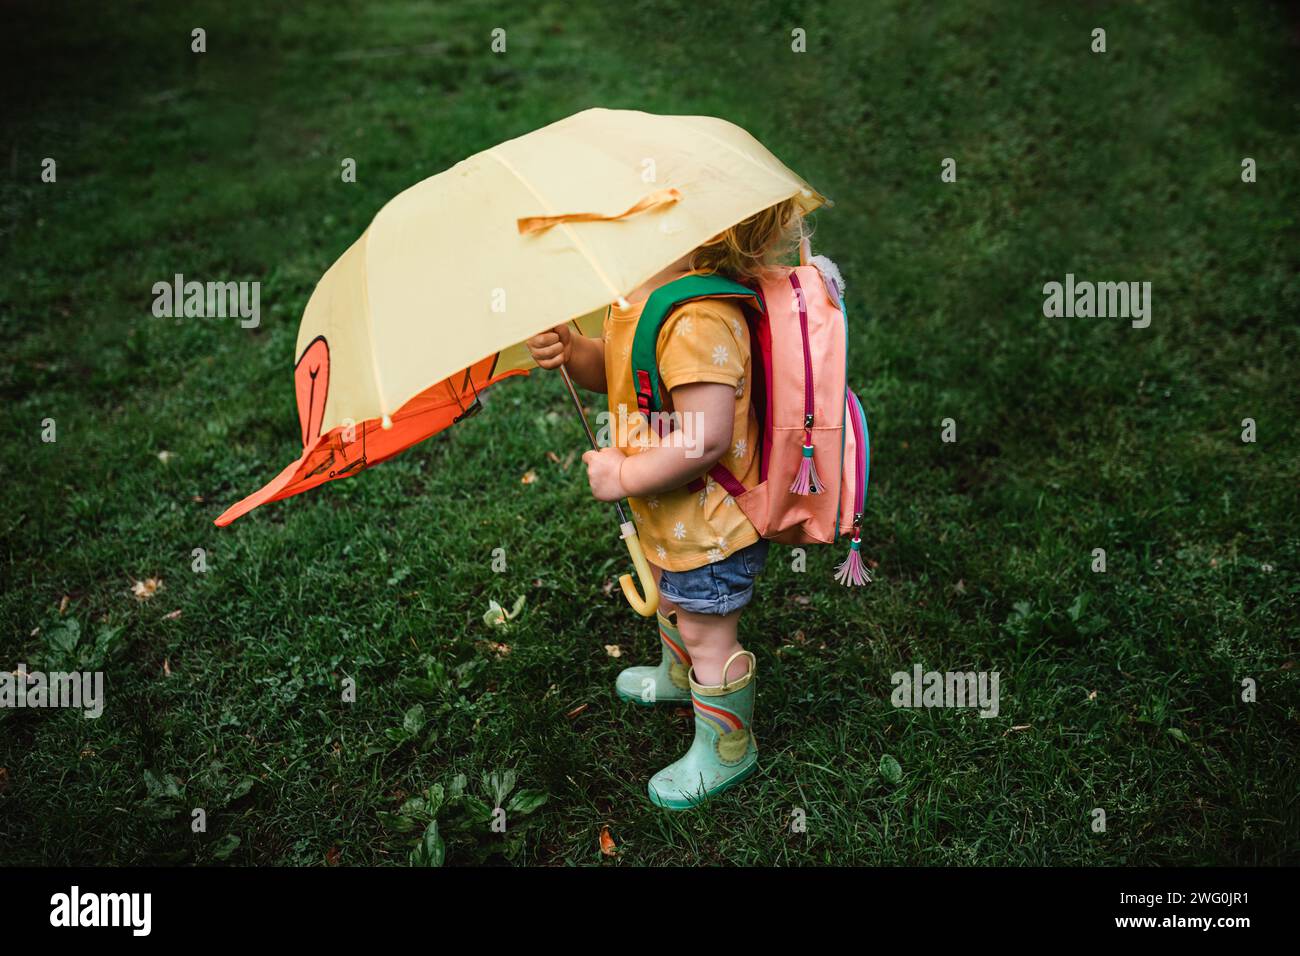 Toddler wearing backpack and rainboots under umbrella Stock Photo